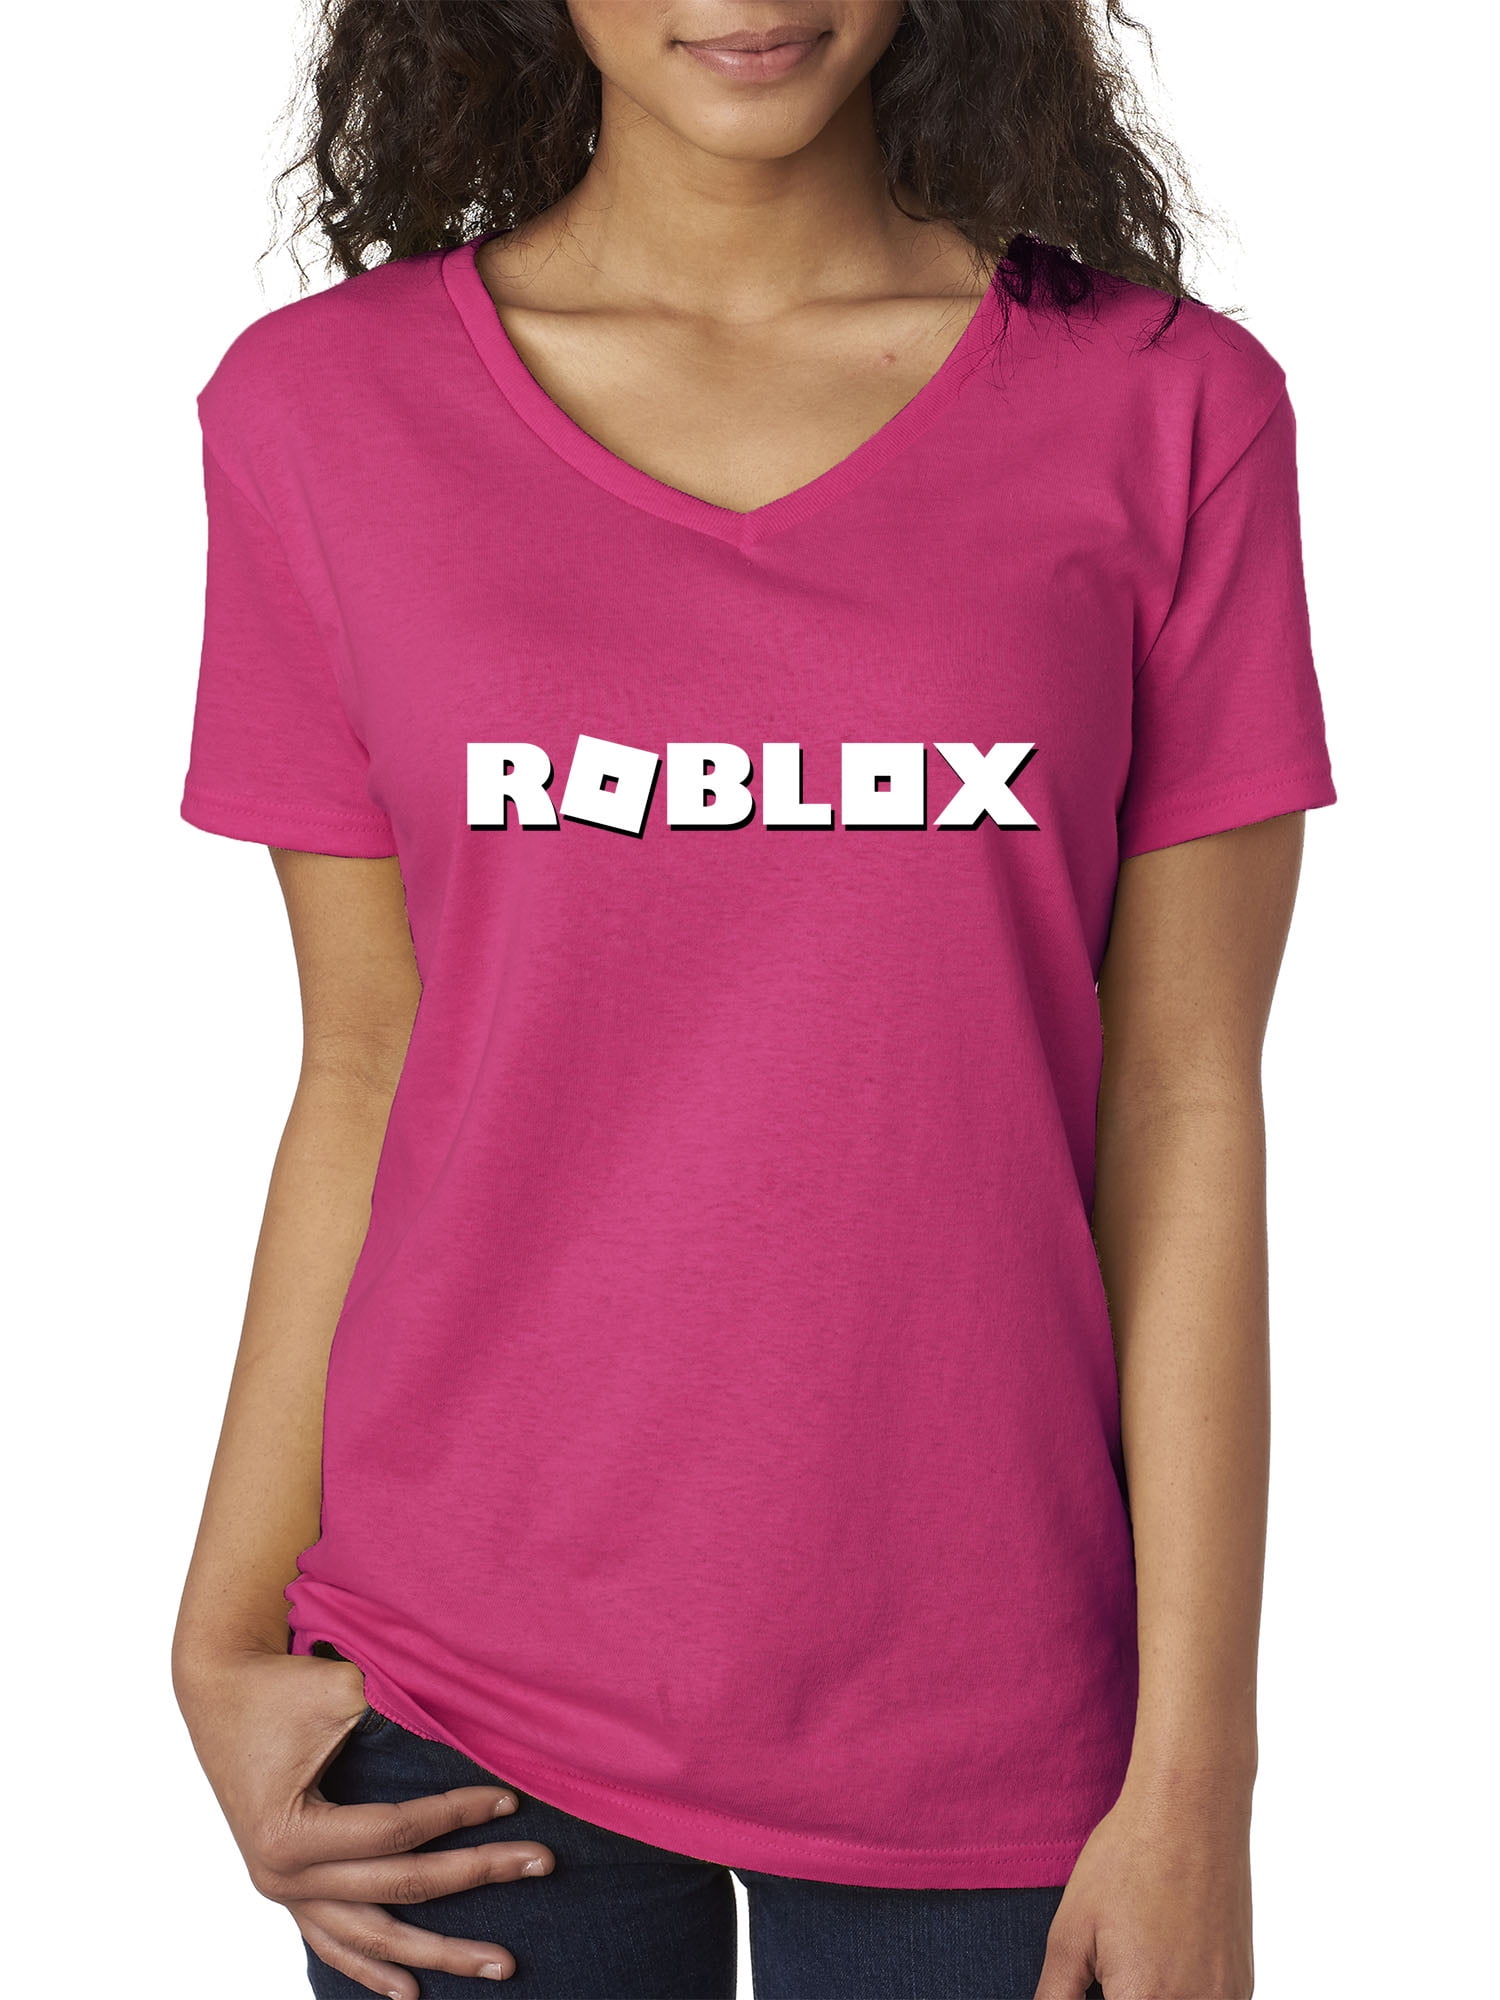 New Way New Way 923 Women S V Neck T Shirt Roblox Logo Game Accent Small Heliconia Walmart Com - denim jeans shorts w anklet roblox